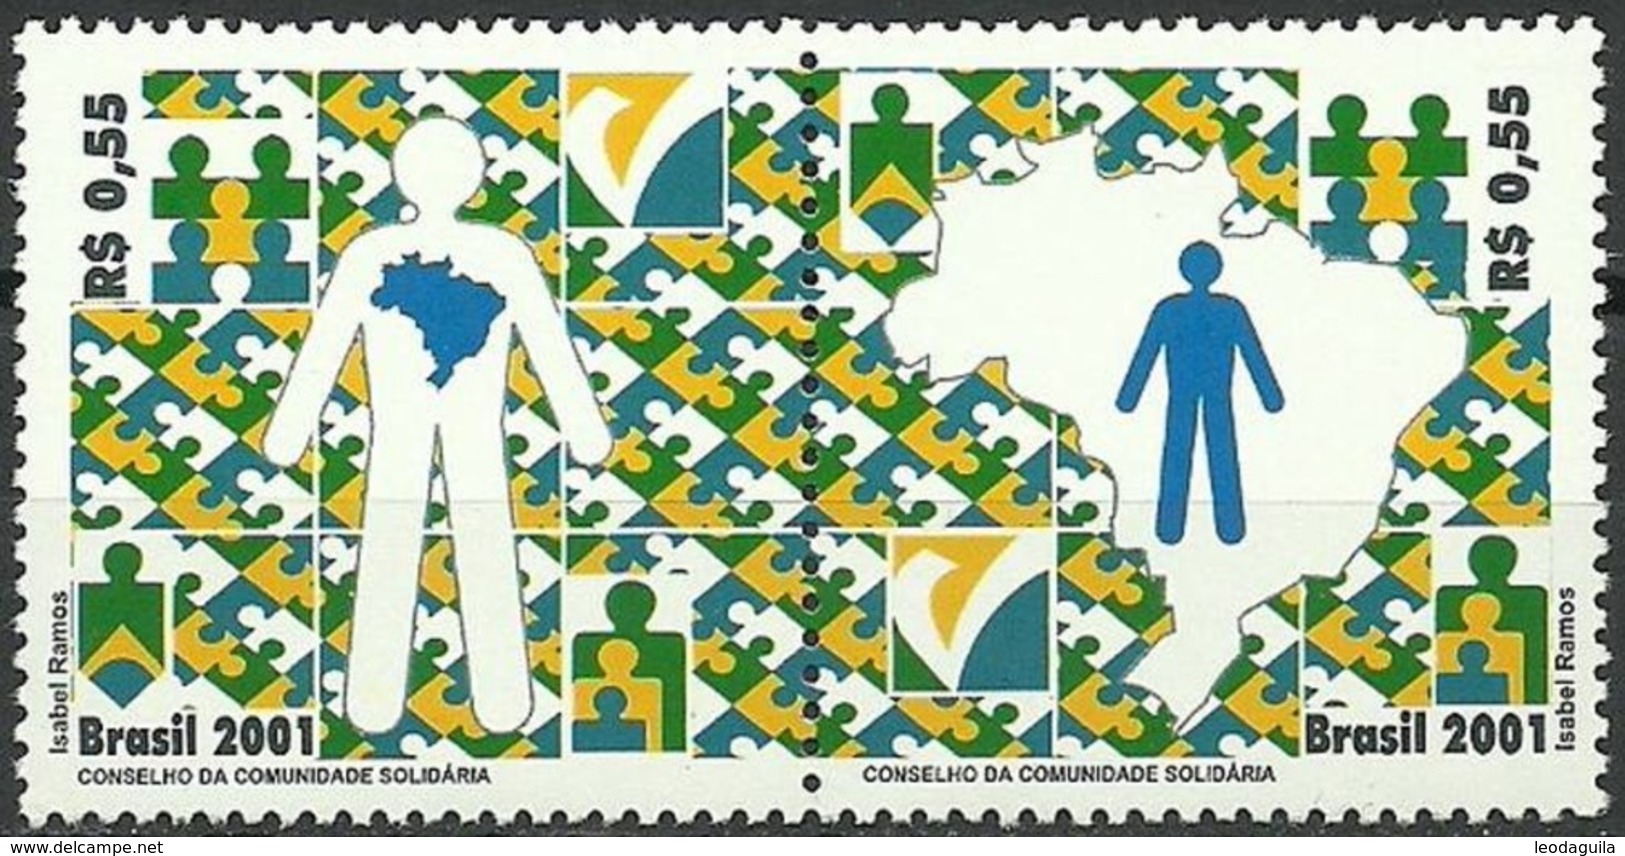 BRAZIL #2808  -  EDUCATION, SOLIDARY COMMUNITY PROGRAMS - MAPS -  2V  -   MINT - Unused Stamps